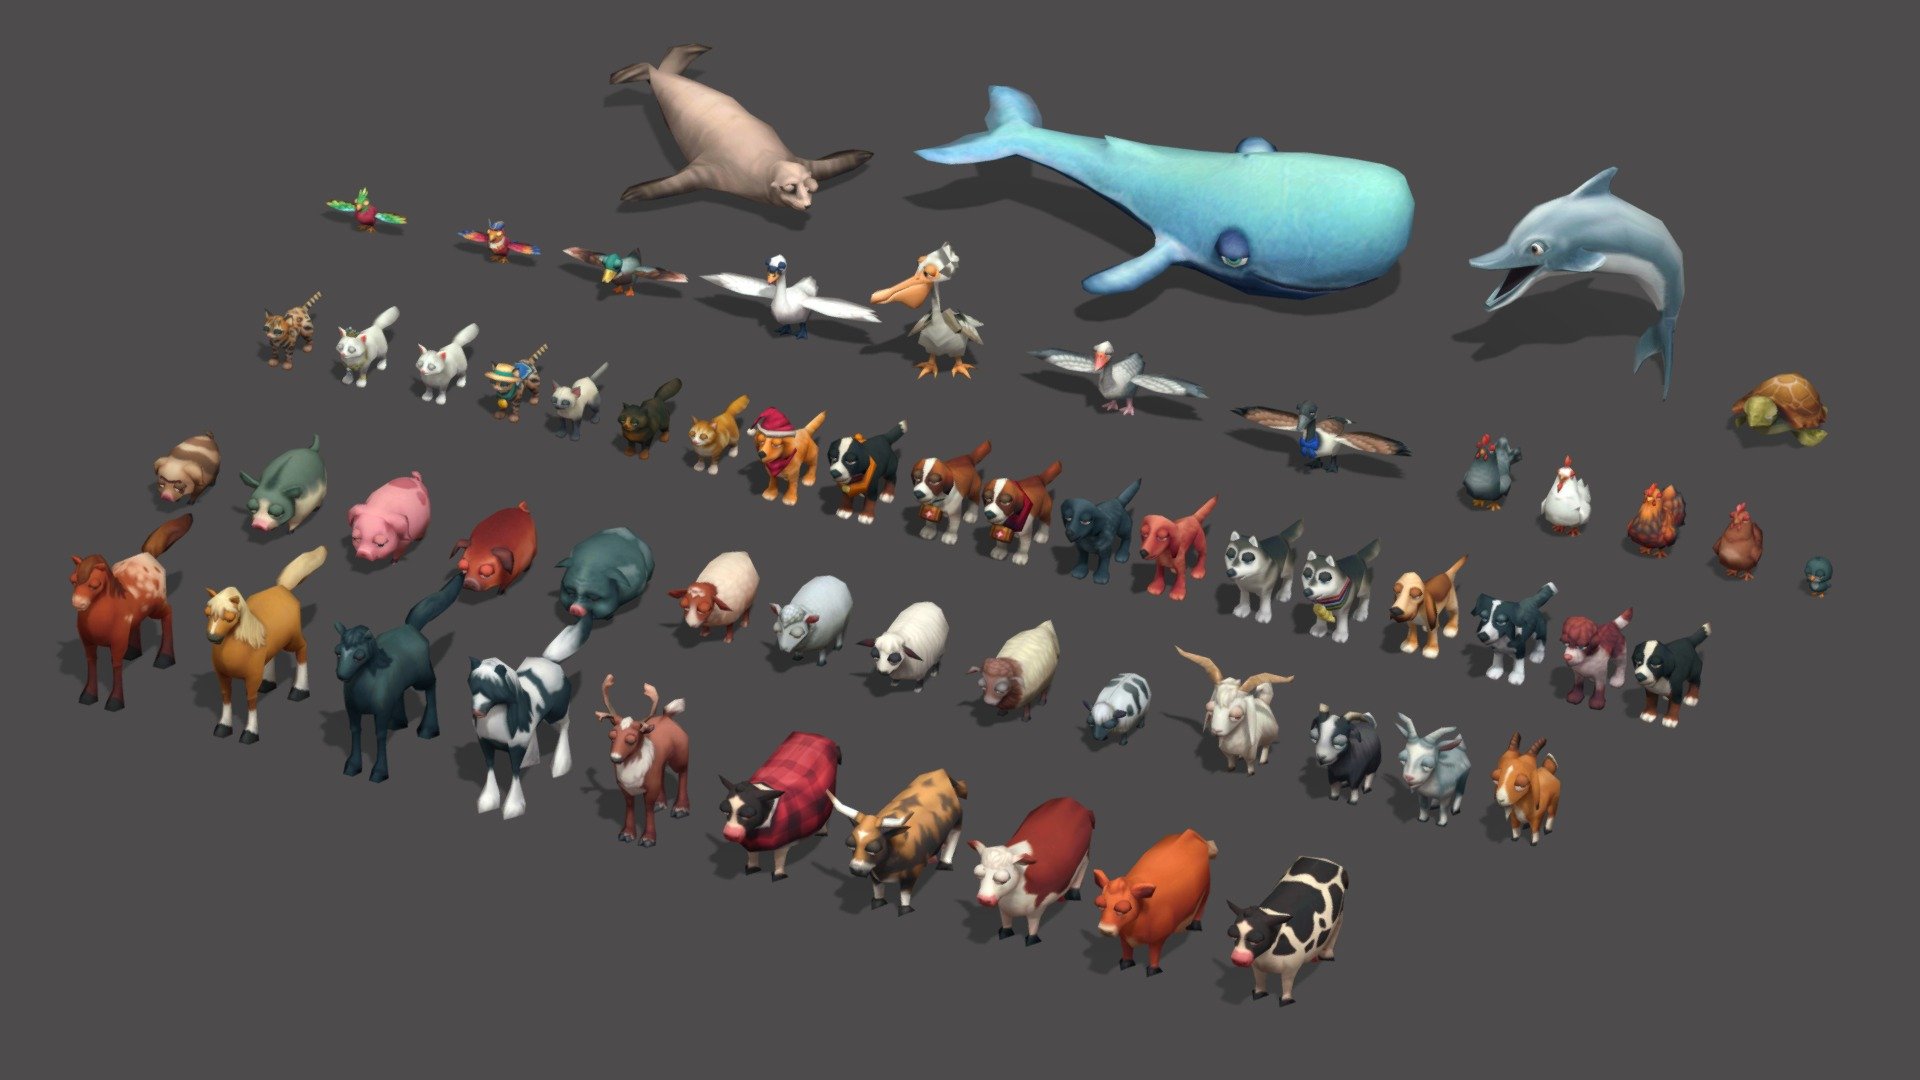 Lowpoy Animal Pack

cow

horse

dog

cat

pig

goat

duck

parrot 

turtle 

dolphin 

chicken 

sea lion

dear

sheep
 - Lowpoly Animal Pack - 3D model by Usman Ahmed GIll (@usman.ahmed.gill.93) 3d model